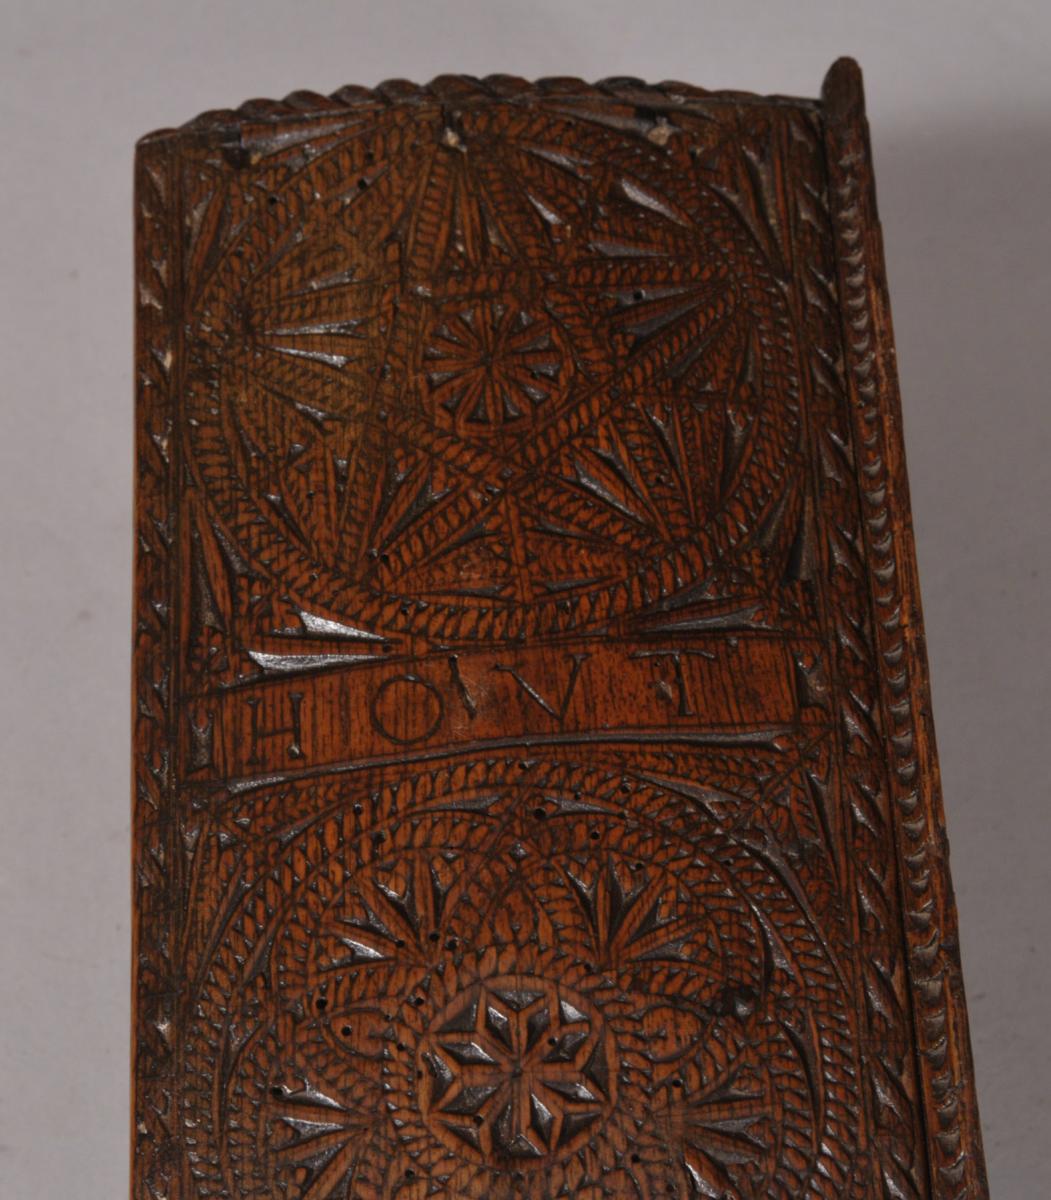 S/4885 Antique Treen 17th Century Chip Carved Ash Box